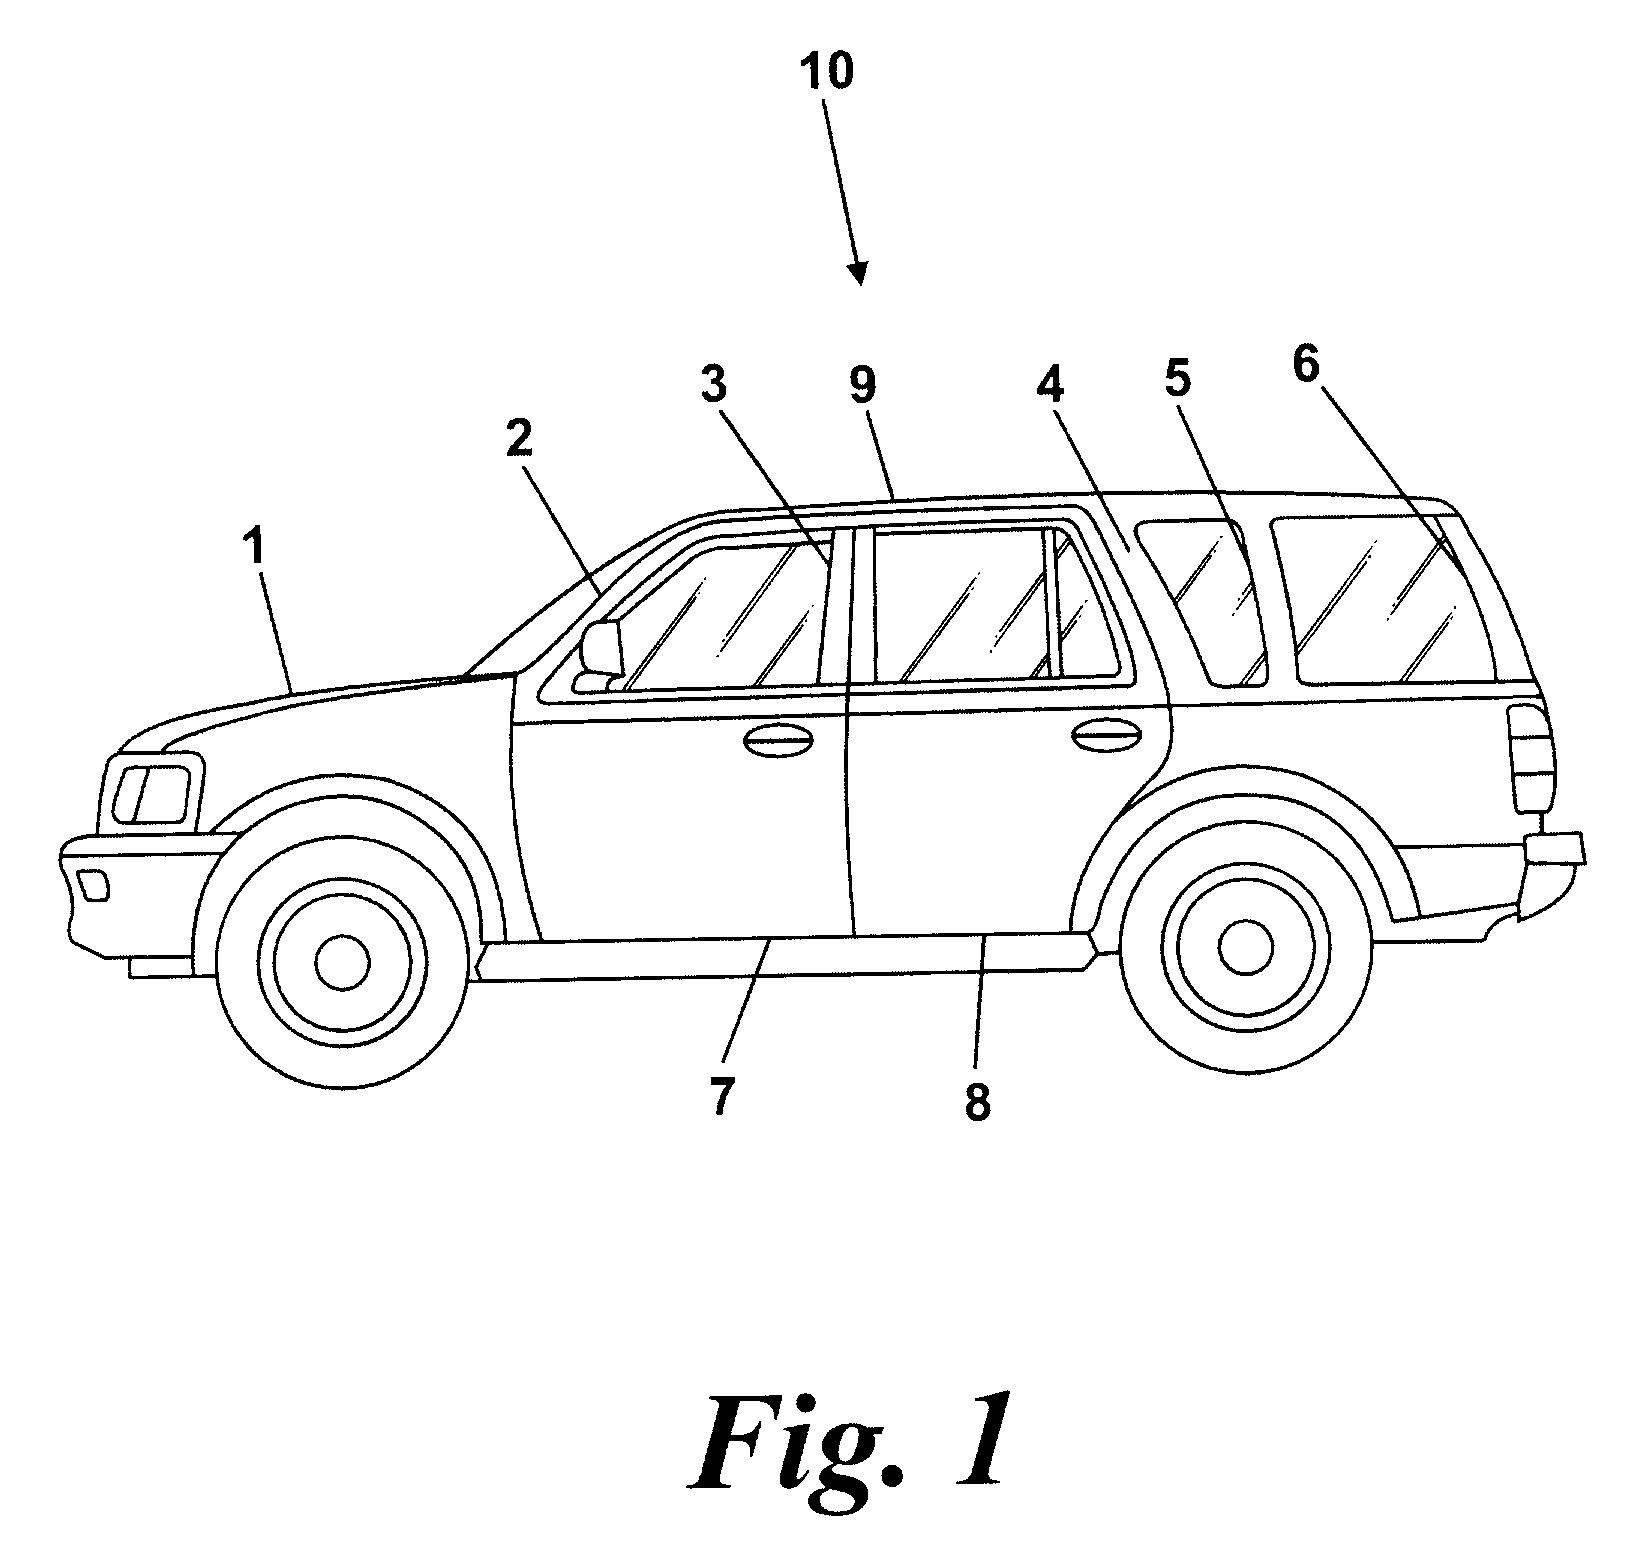 Structural member for a motor vehicle